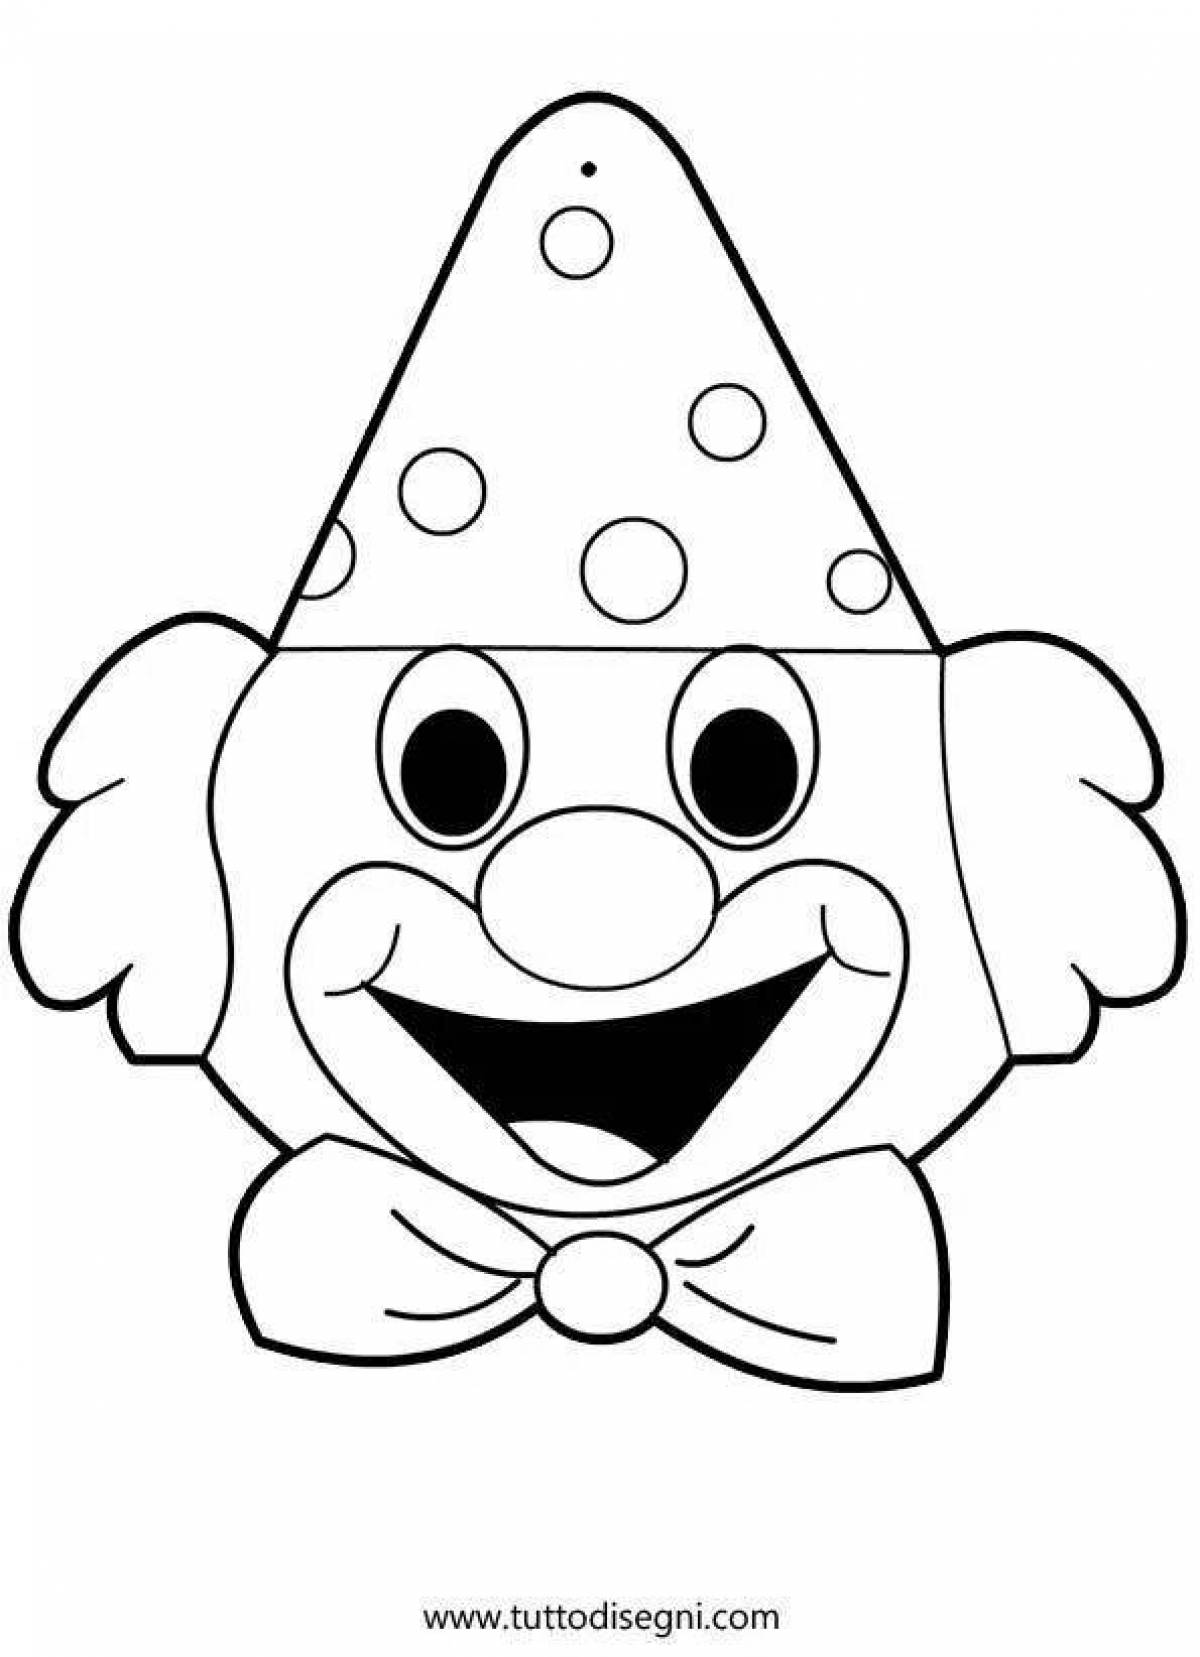 Shine clown face coloring page